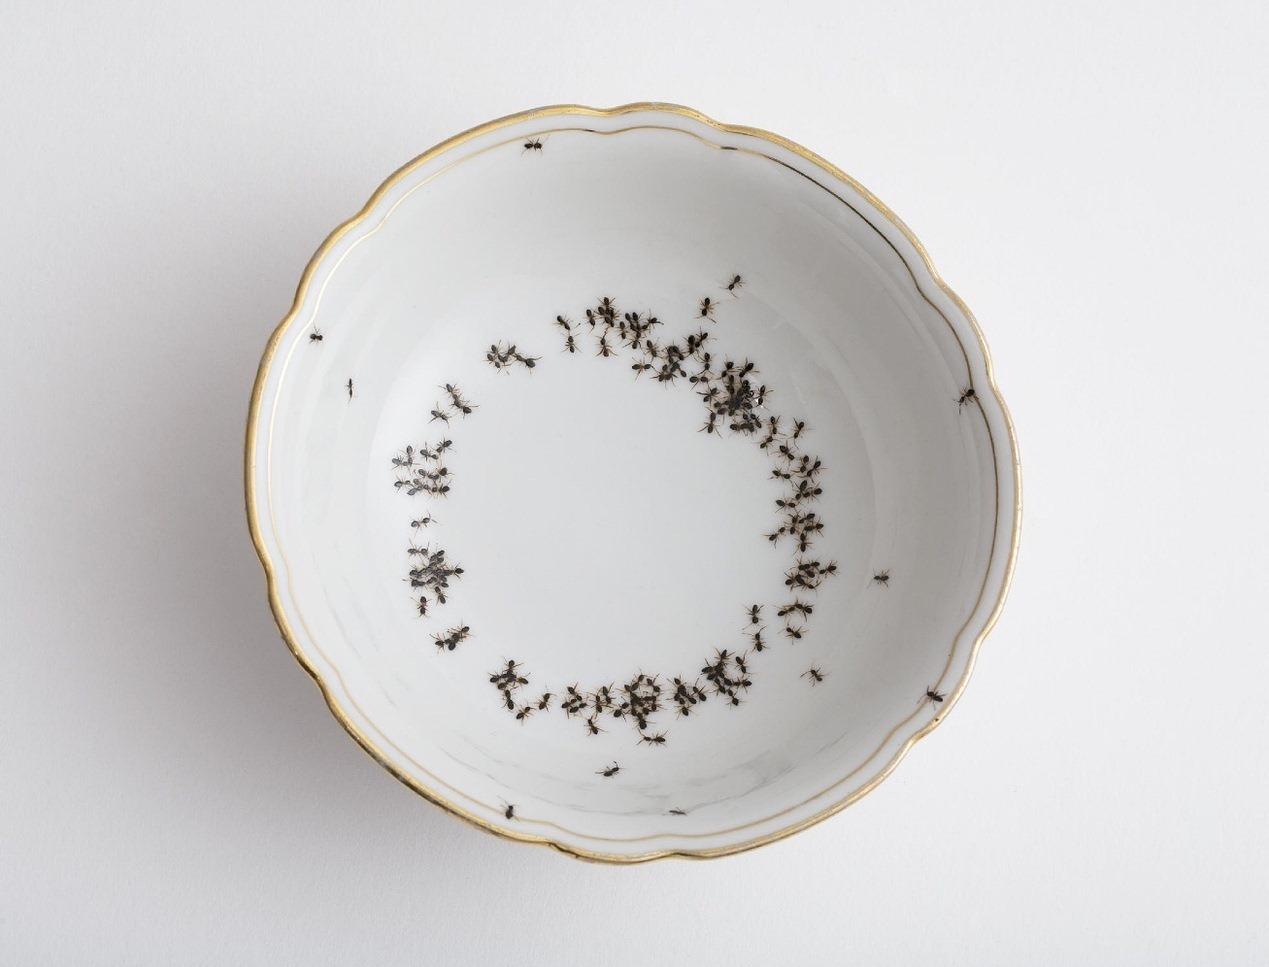 gildedgravestones:  Vintage Porcelain Covered With Hand-Painted Ants   This would